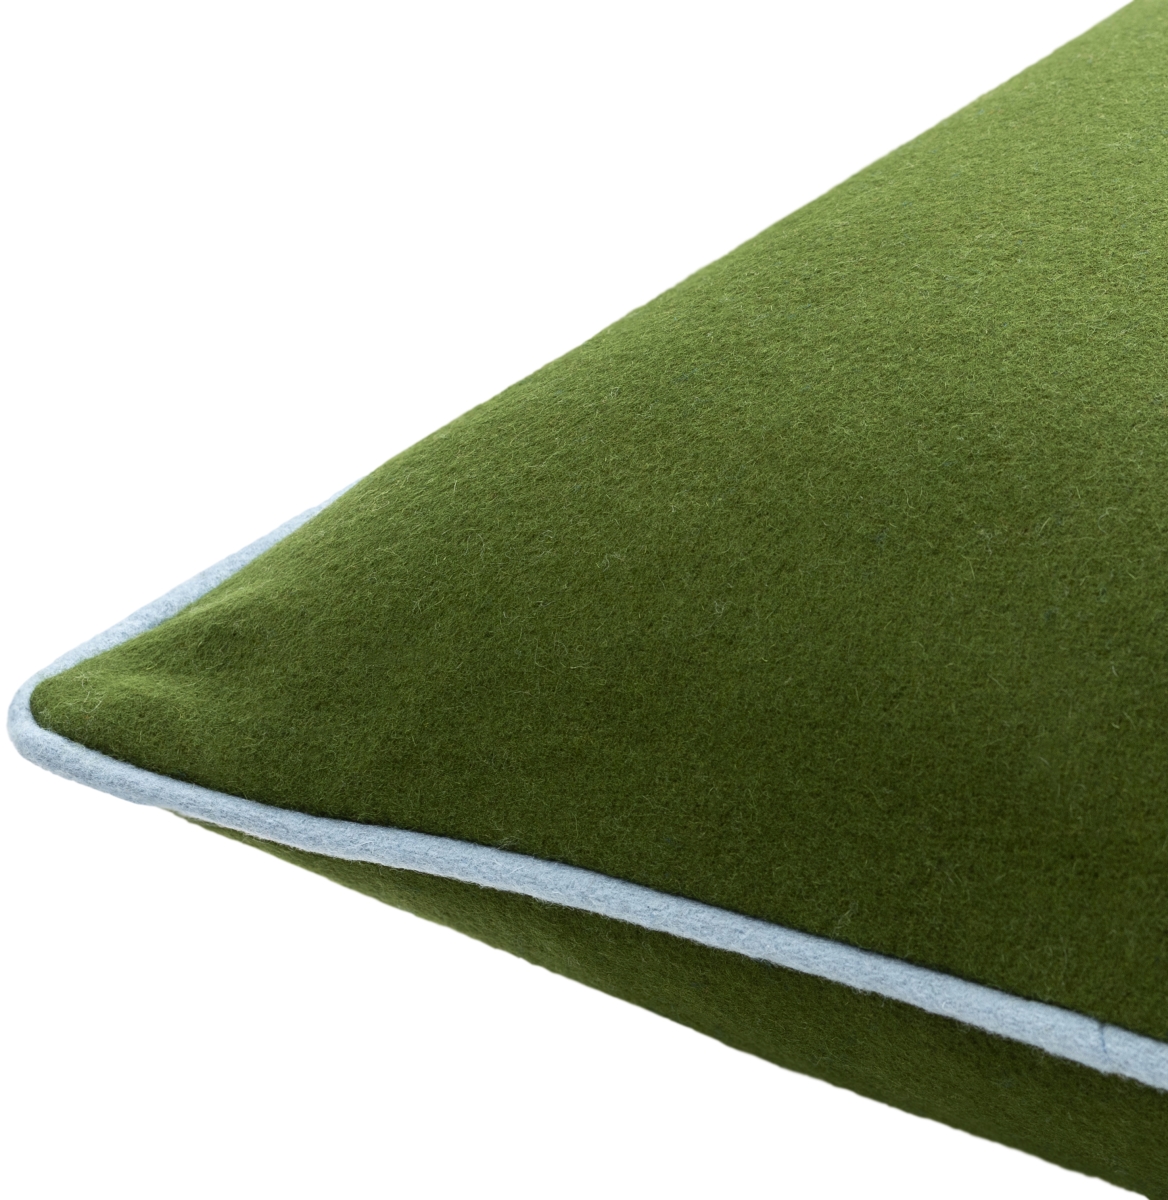 Picture of Livabliss AKL004-2020D 20 x 20 in. Ackerly AKL-004 Square Accent Down Filled Pillow&#44; Grass Green & Denim